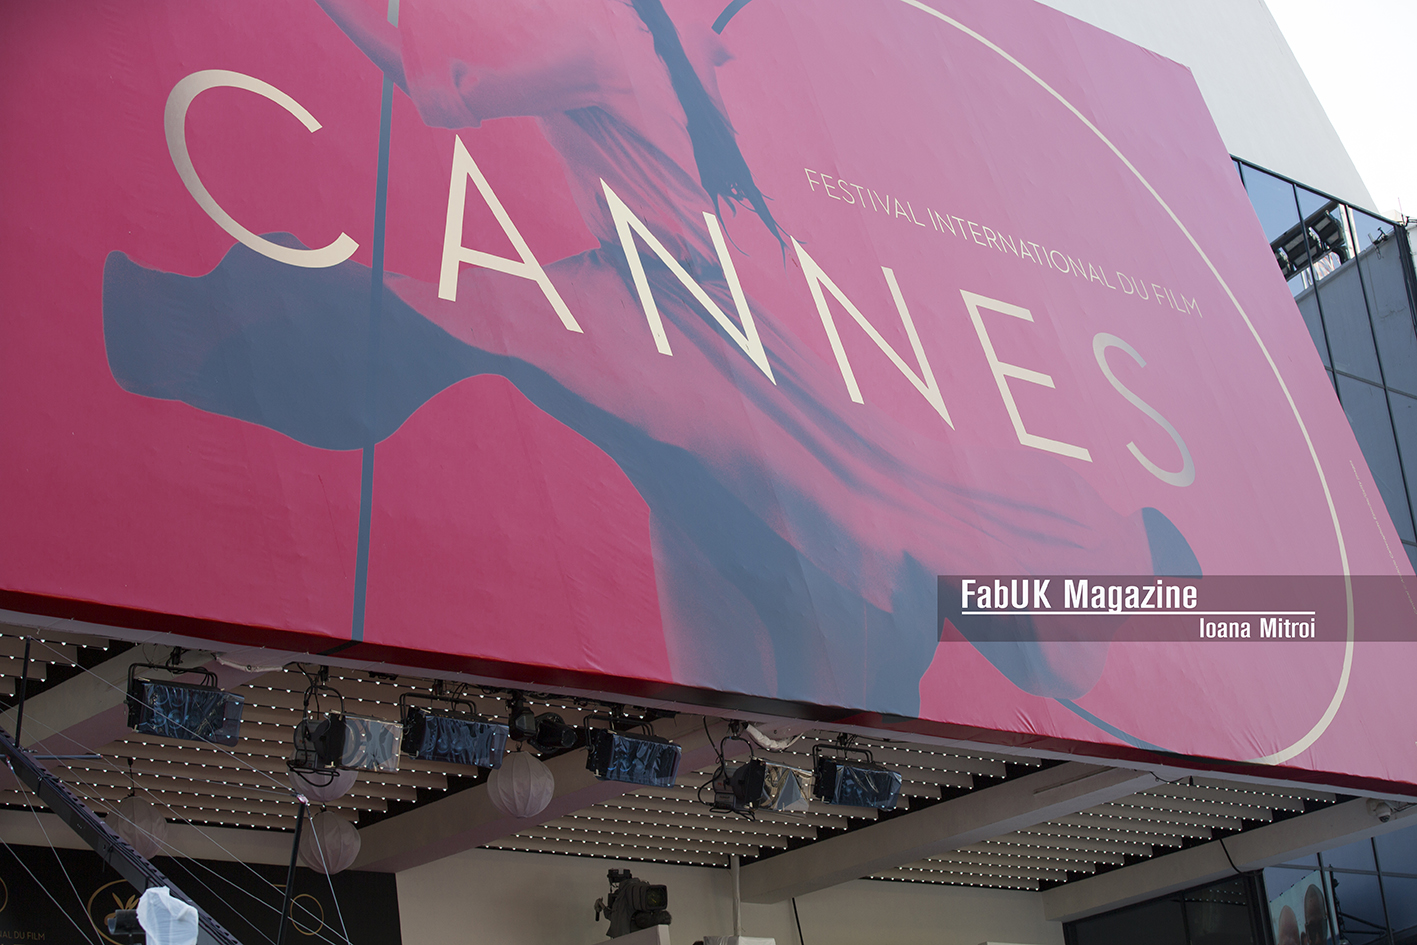 FabUK Magazine was in Cannes 1